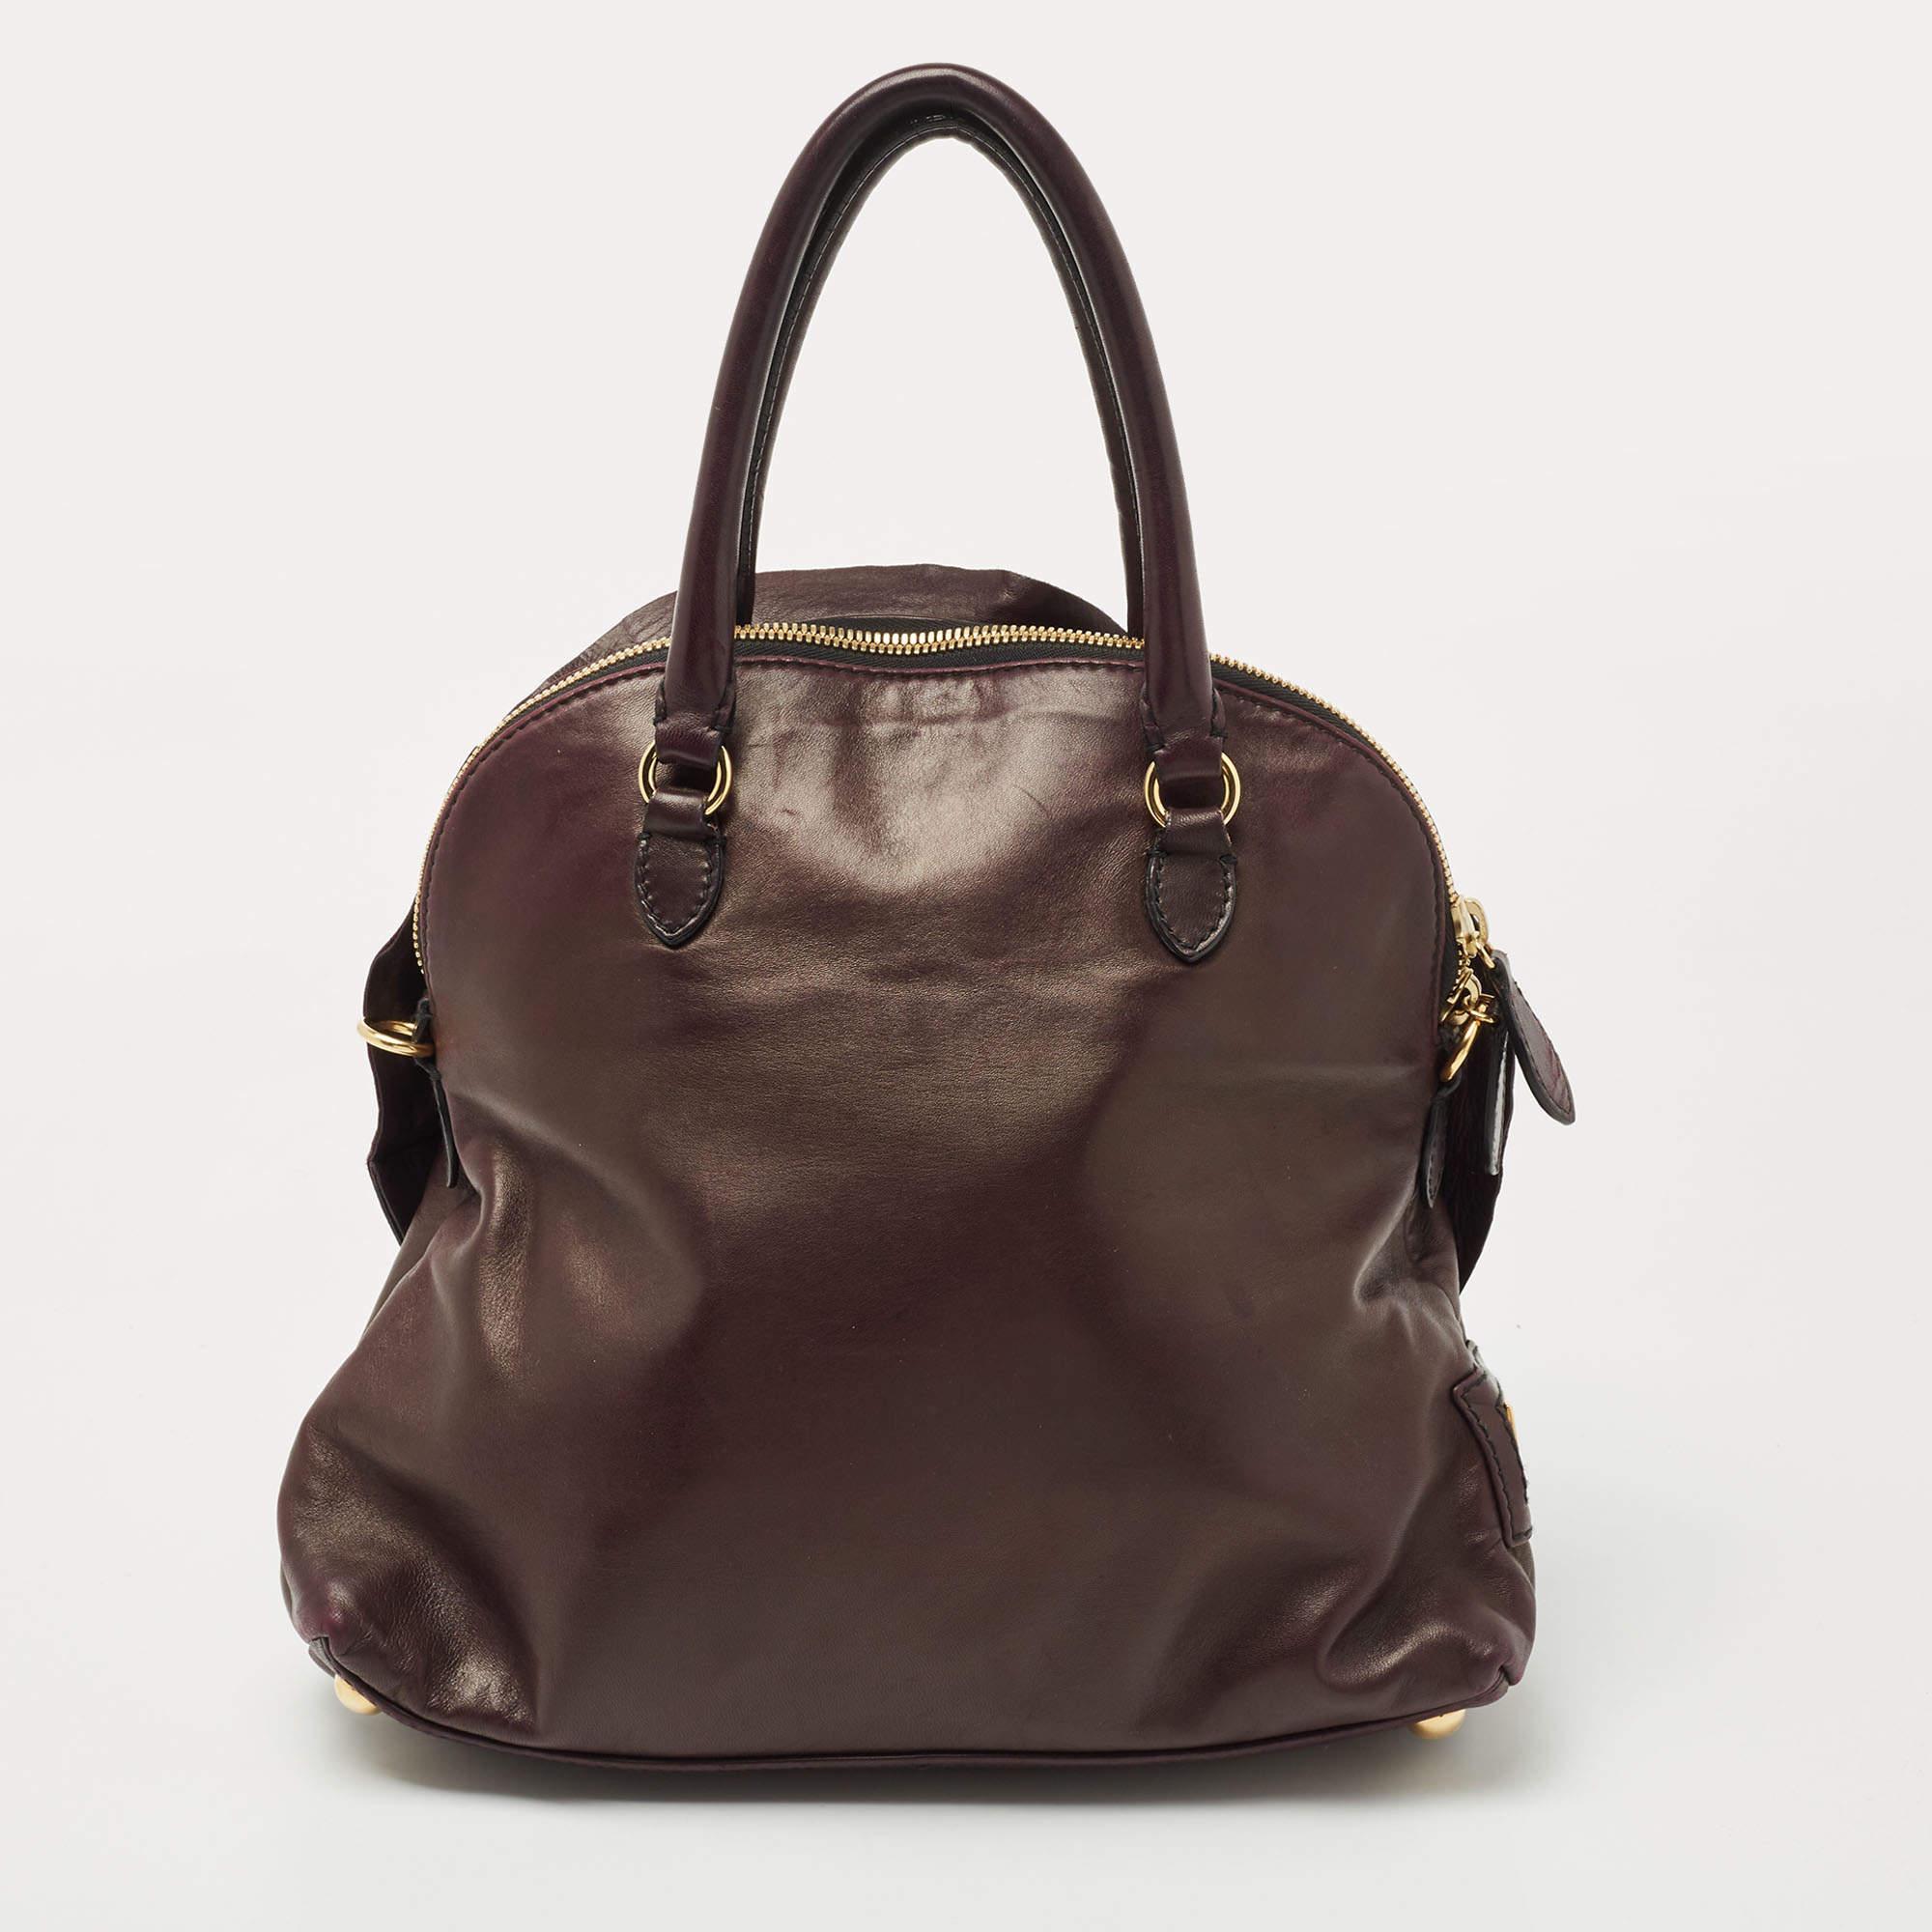 This Valentino Dome Bag is bright, classy and fabulous. Made from leather, this purple bag features the iconic Valentino rose motif pleats detailing at the front. It is equipped with protective feet and rolled handles.The zip-enclosed interior is